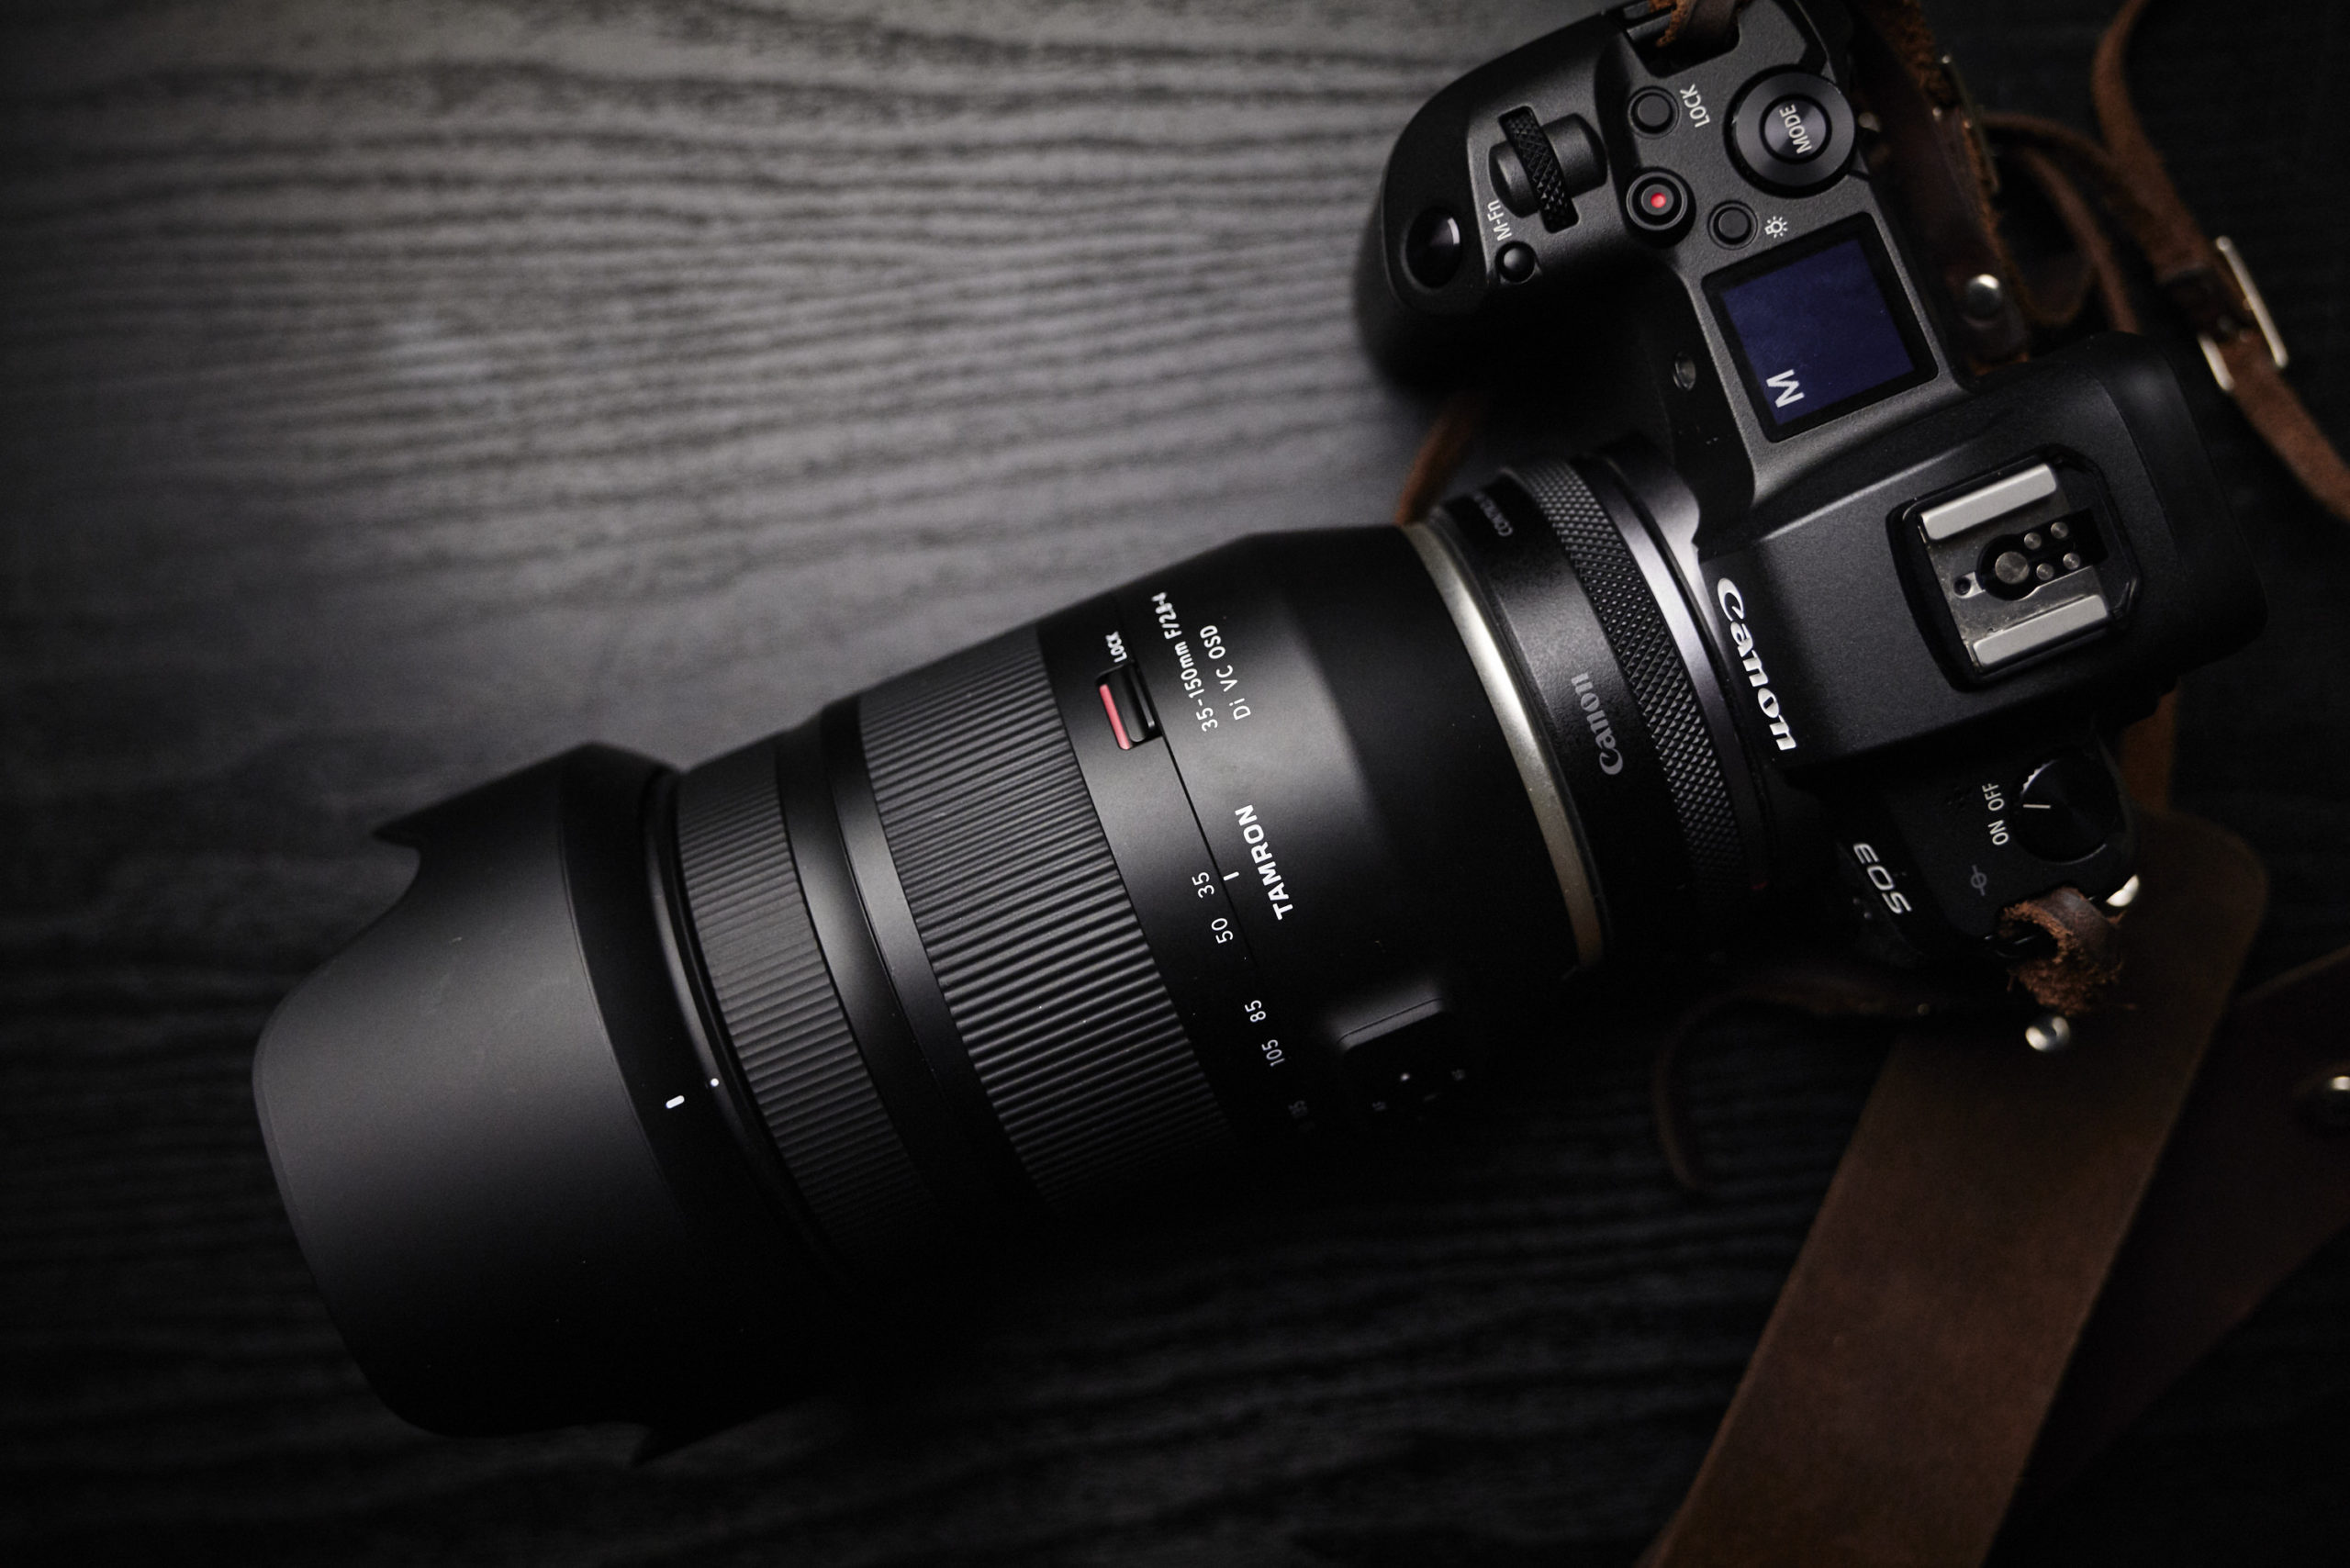 Chris Gampat The Phoblographer Tamron 35-150mm f2.8-4Di VC USD product images review 1